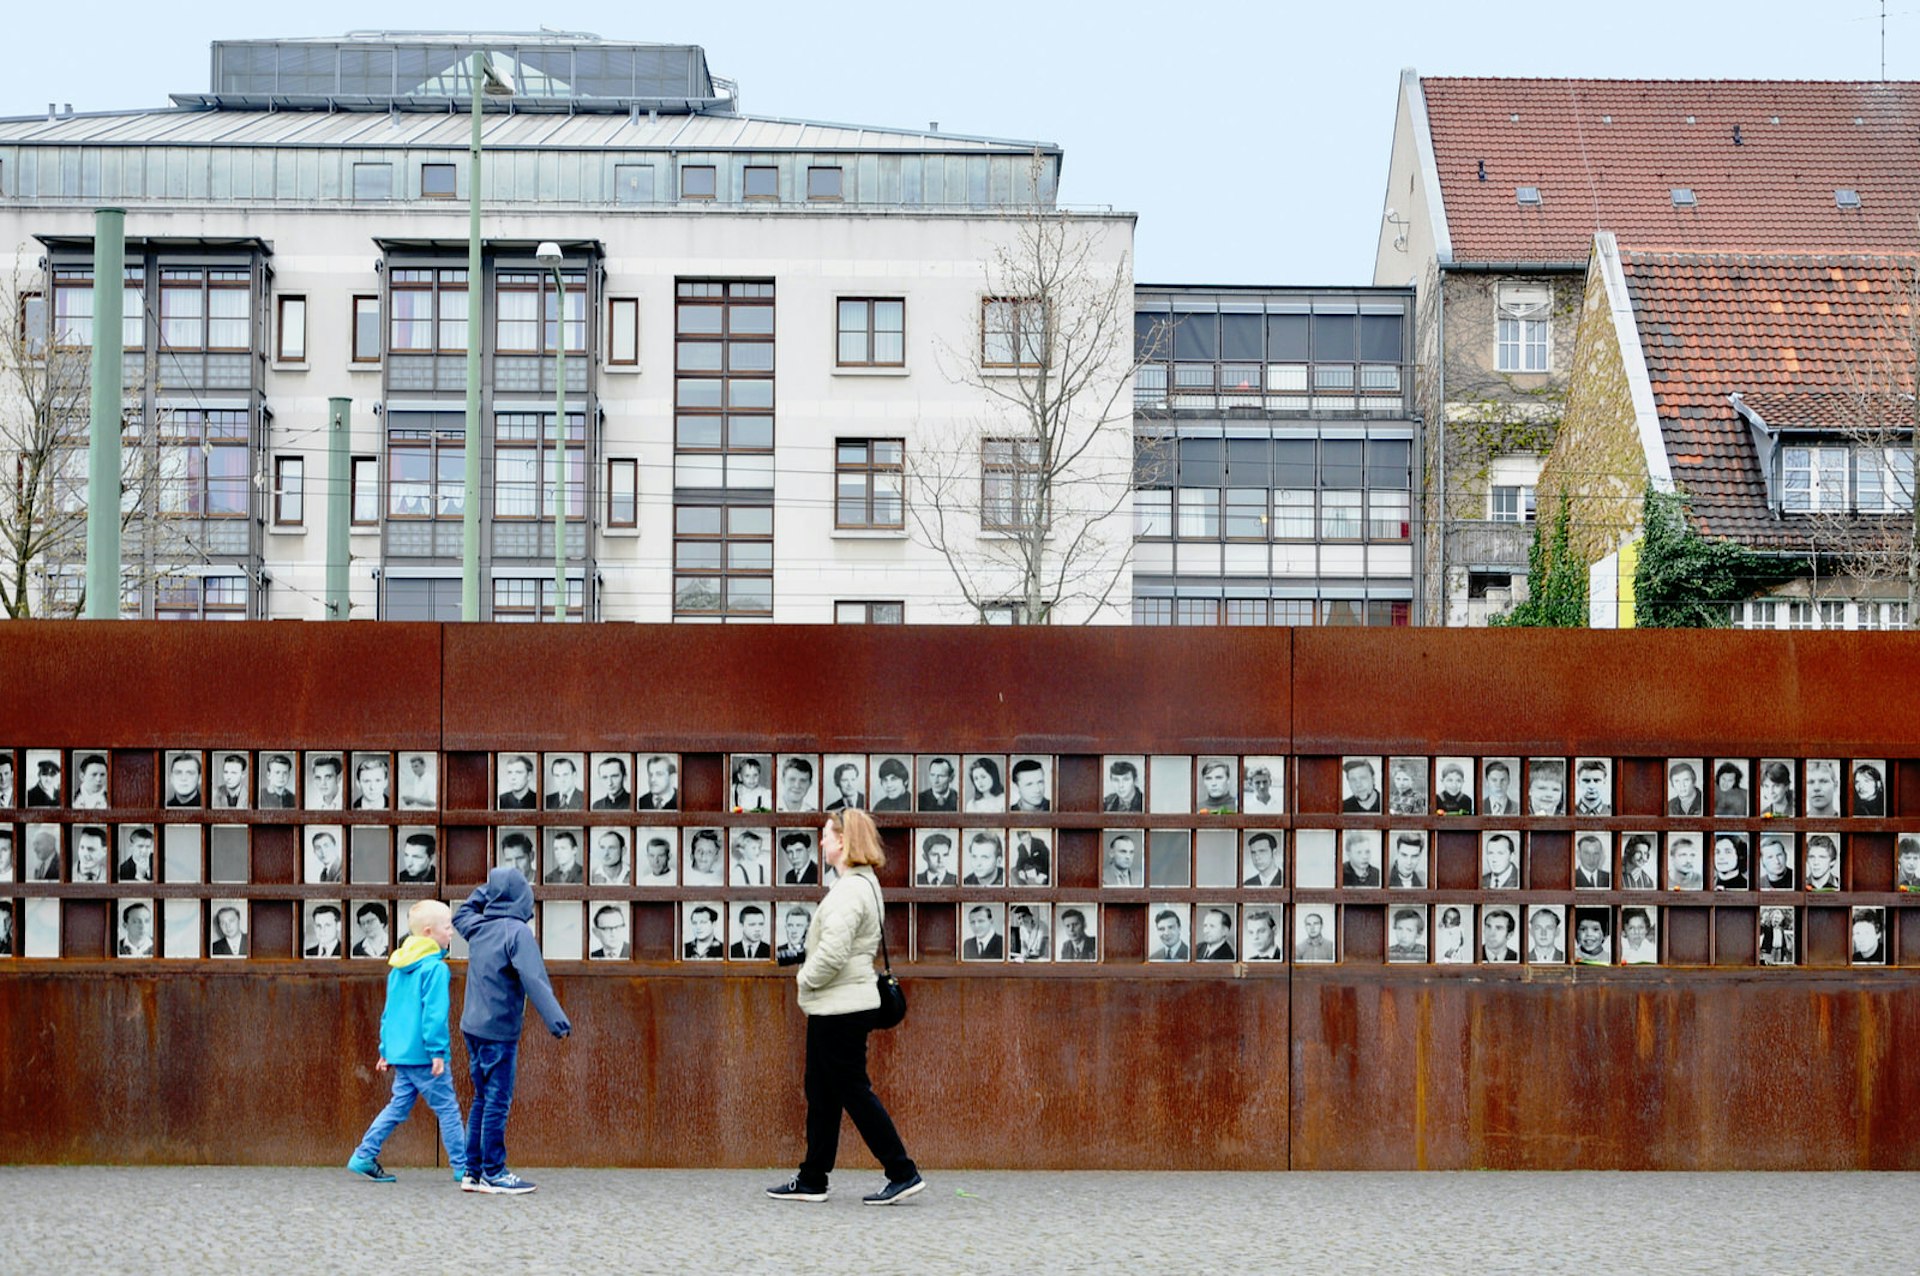 A photo of the Berlin Wall Memorial with three people walking by. The memorial is a metal wall contructed where the Berlin Wall once stood showing black and white photos of people. 